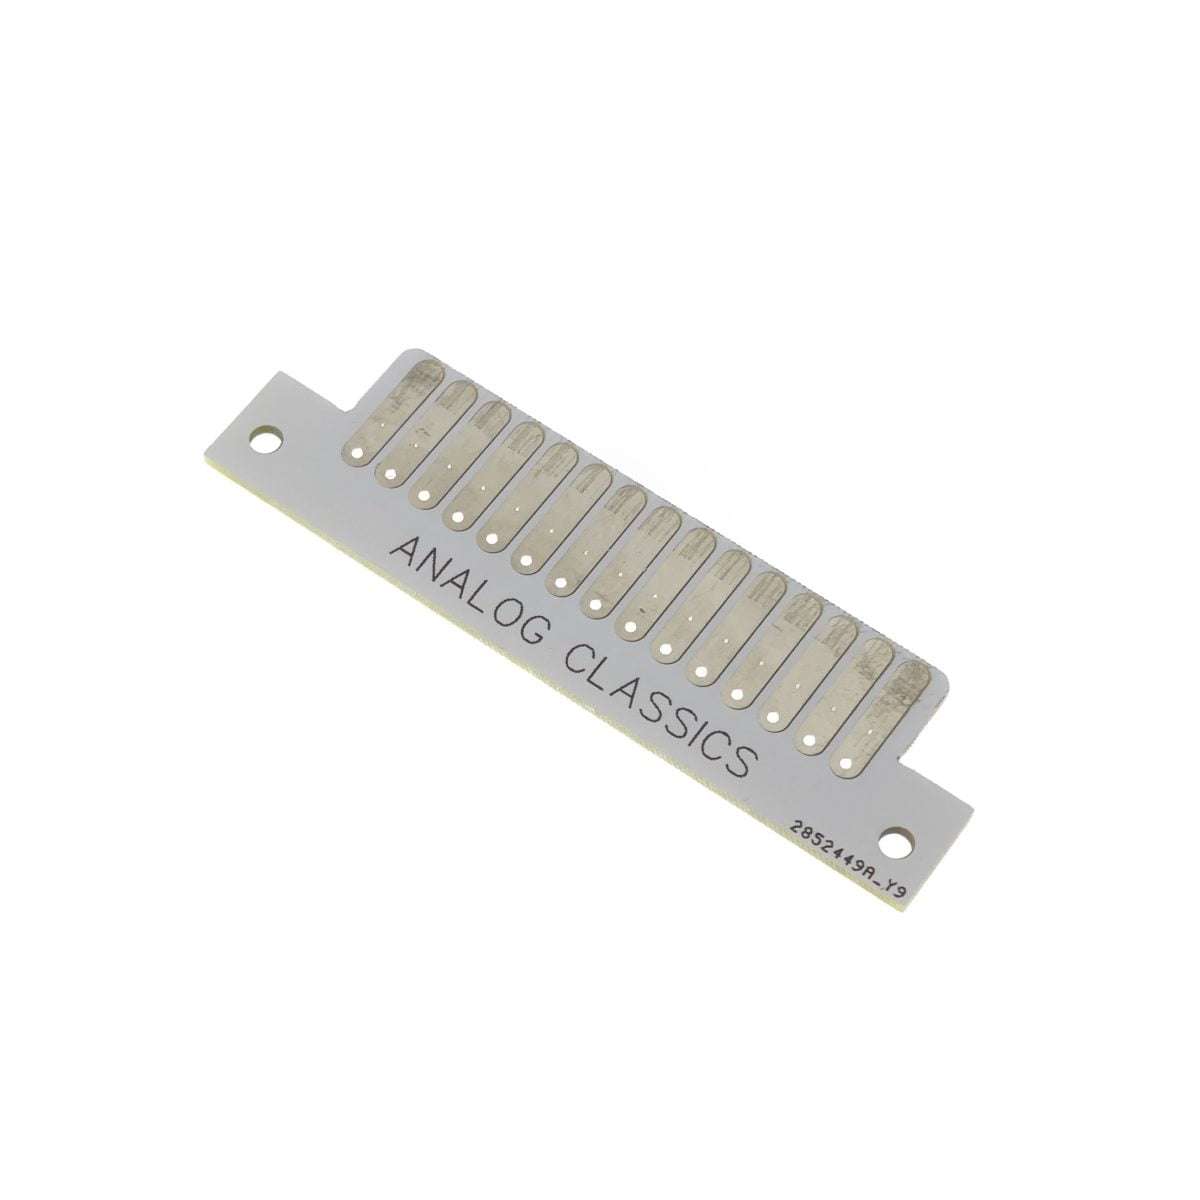 API 500 Series Male Card Edge Connector on a white background